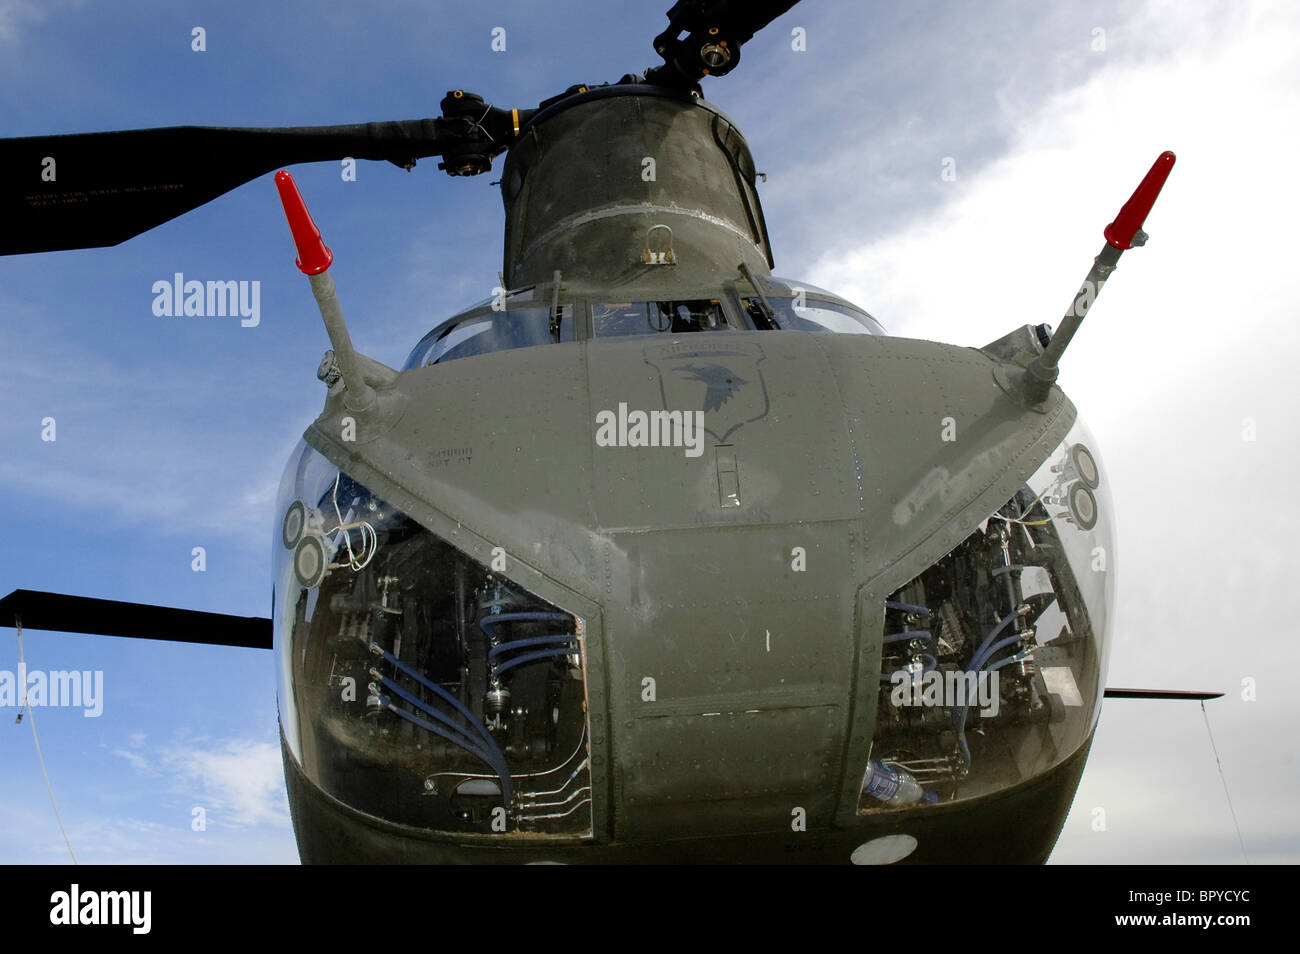 U.S. Army chinook helicopter Fort Campbell Tennessee/Kentucky Stock Photo